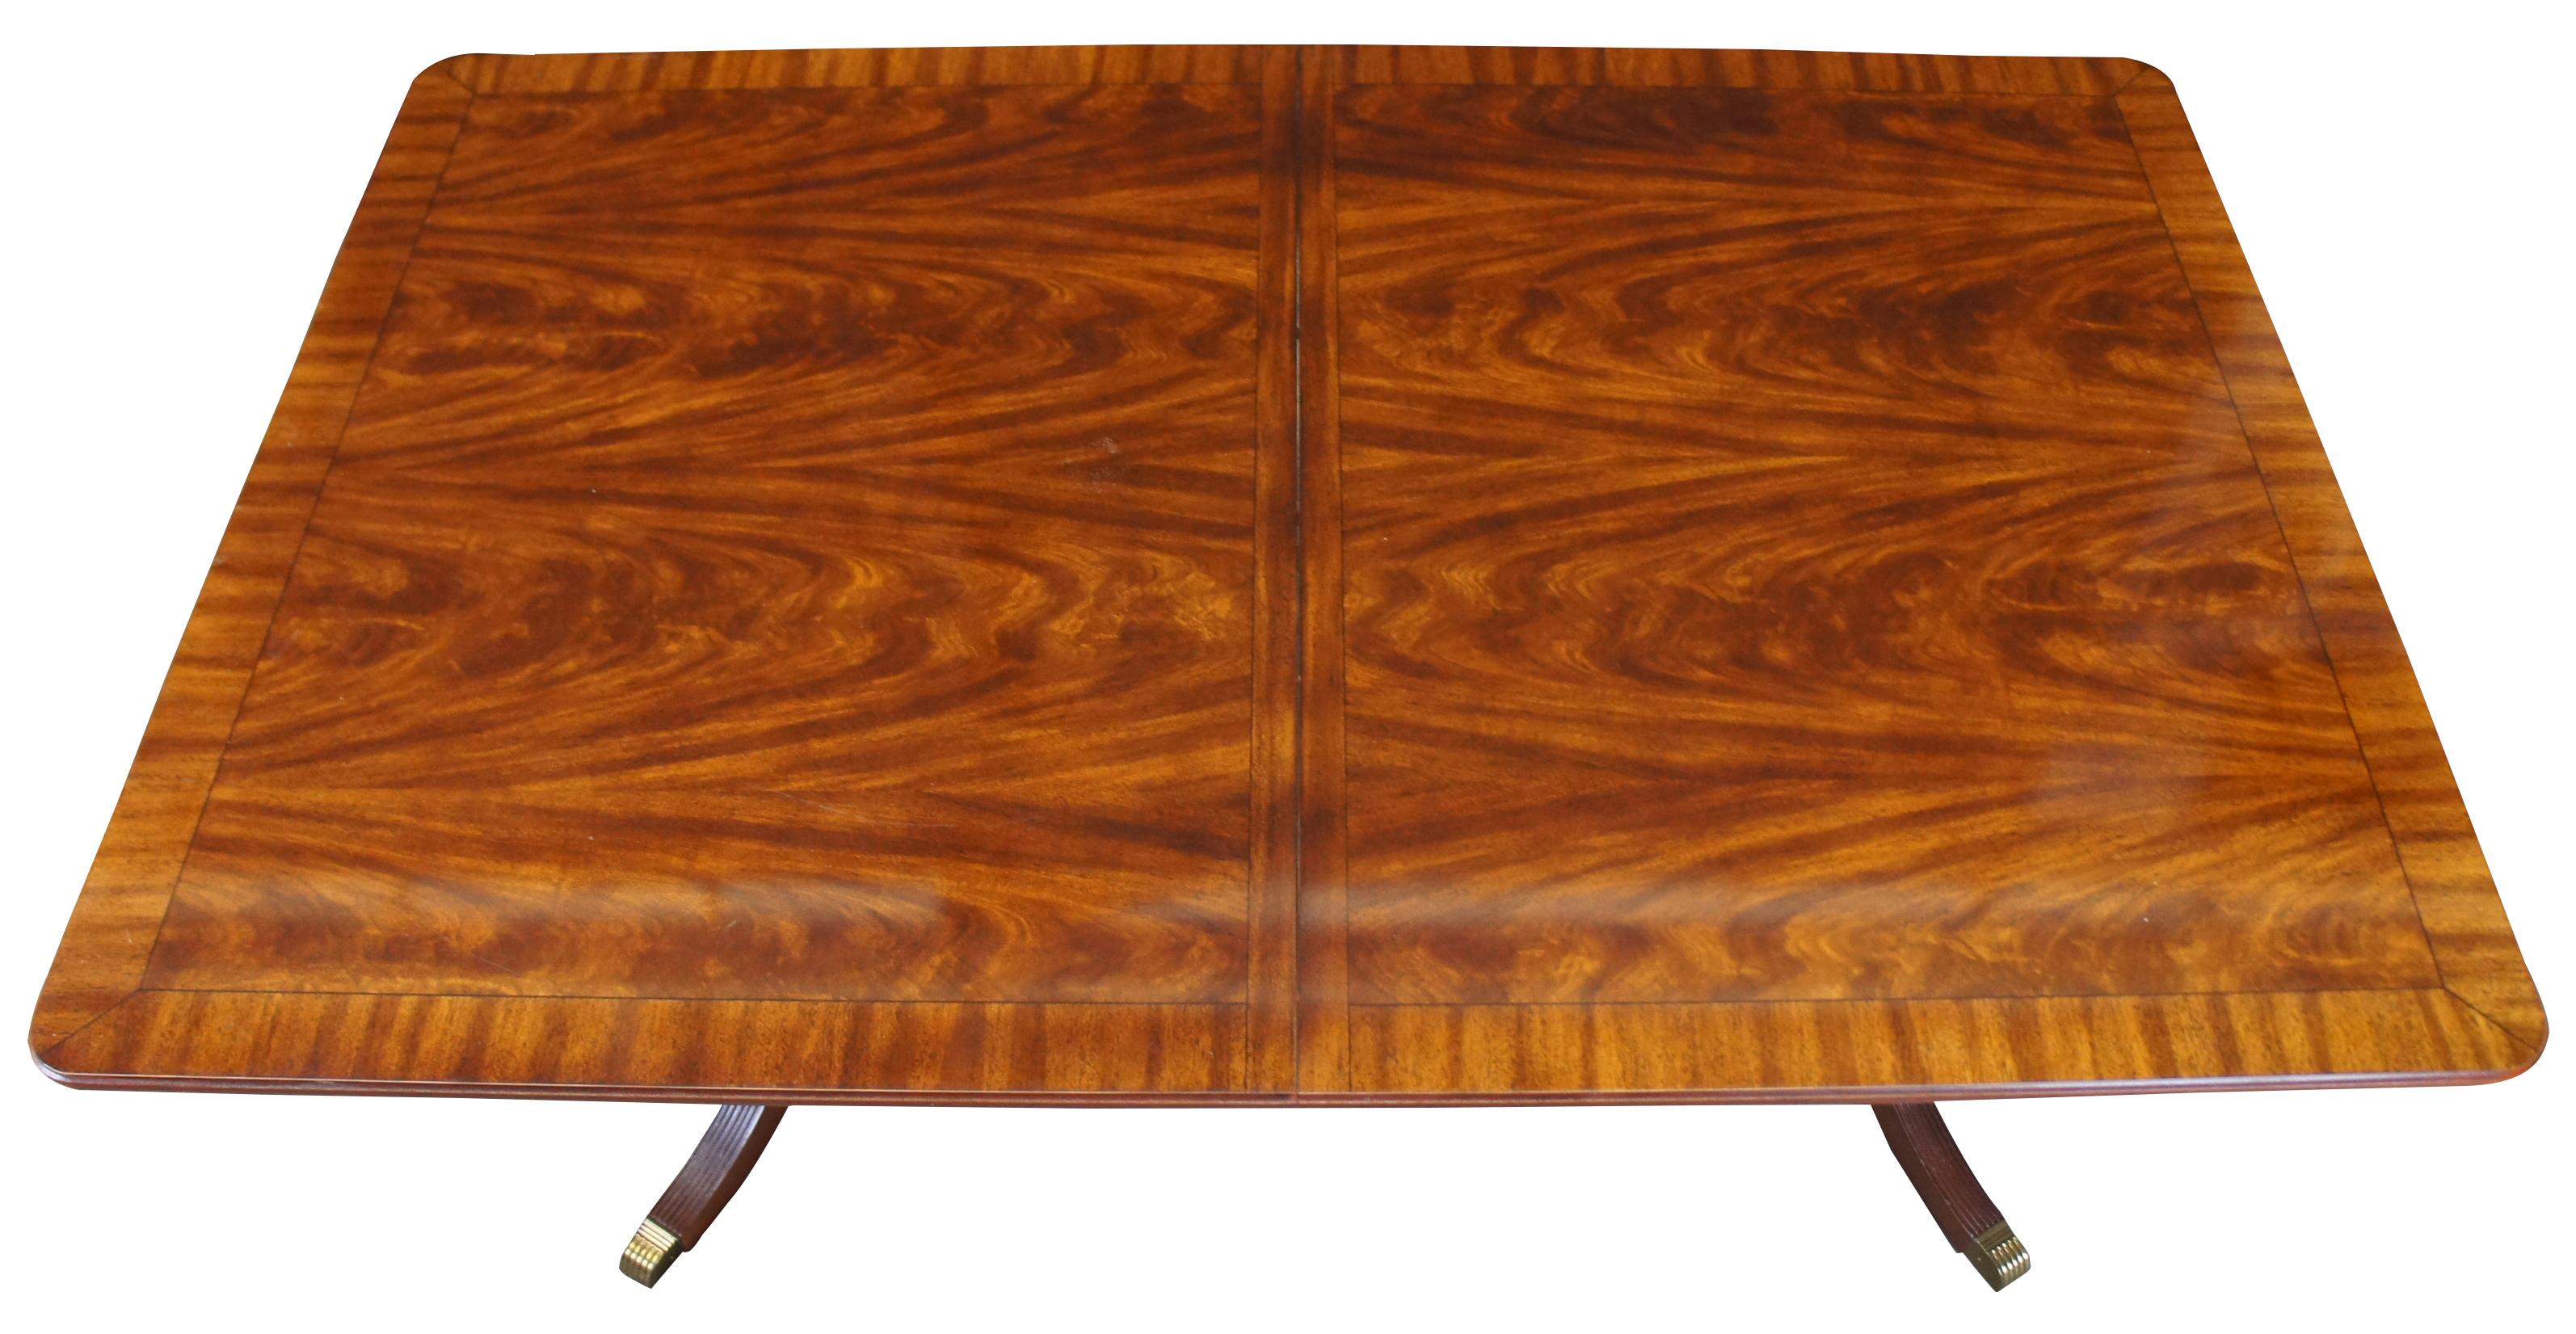 Broyhill Furniture traditional dining table, 512-5265-40. Features an extendable flame mahogany top. The table is supported by a double pedestal base with fluted legs and brass capped feet. 

Measures: Leaf width 18